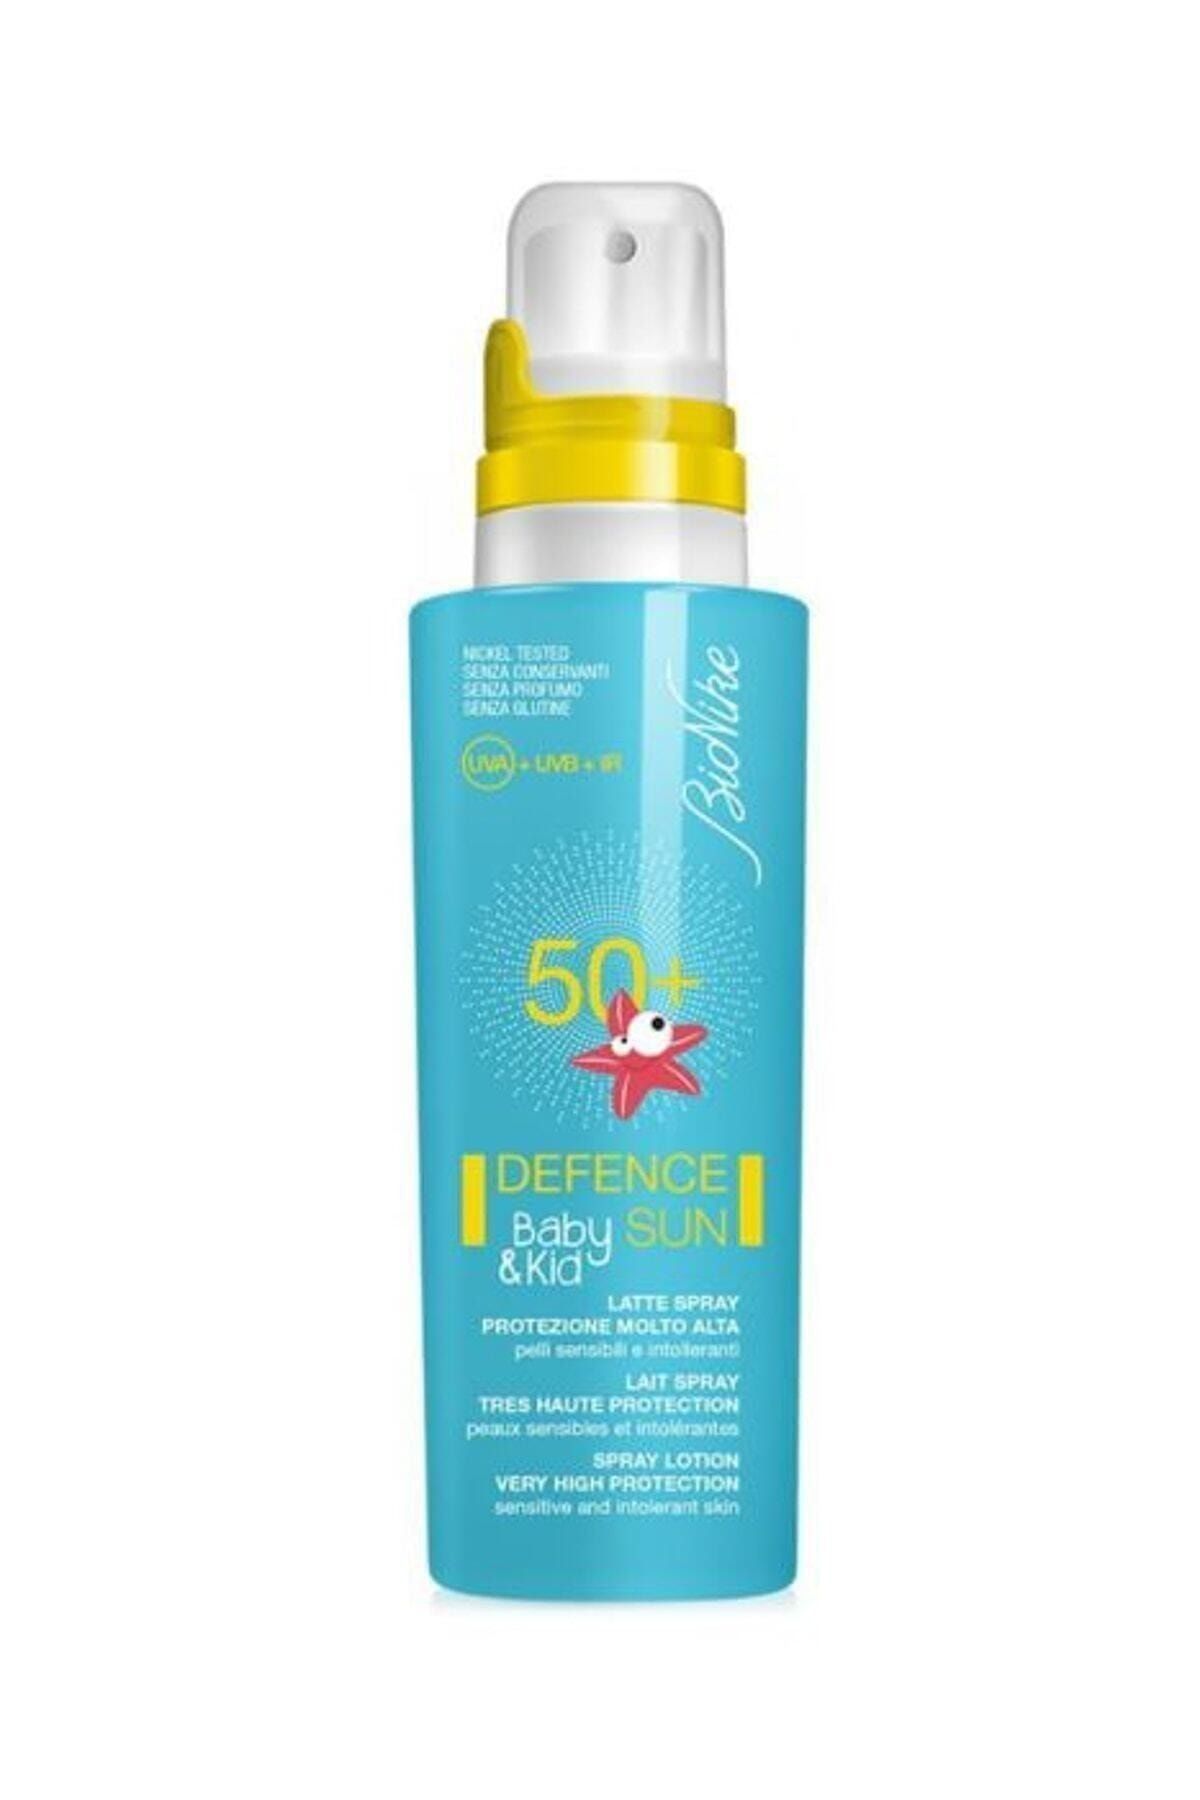 BioNike Defence Sun Baby and Kid Spray Lotion SPF50+ 125 ml 8029041141222